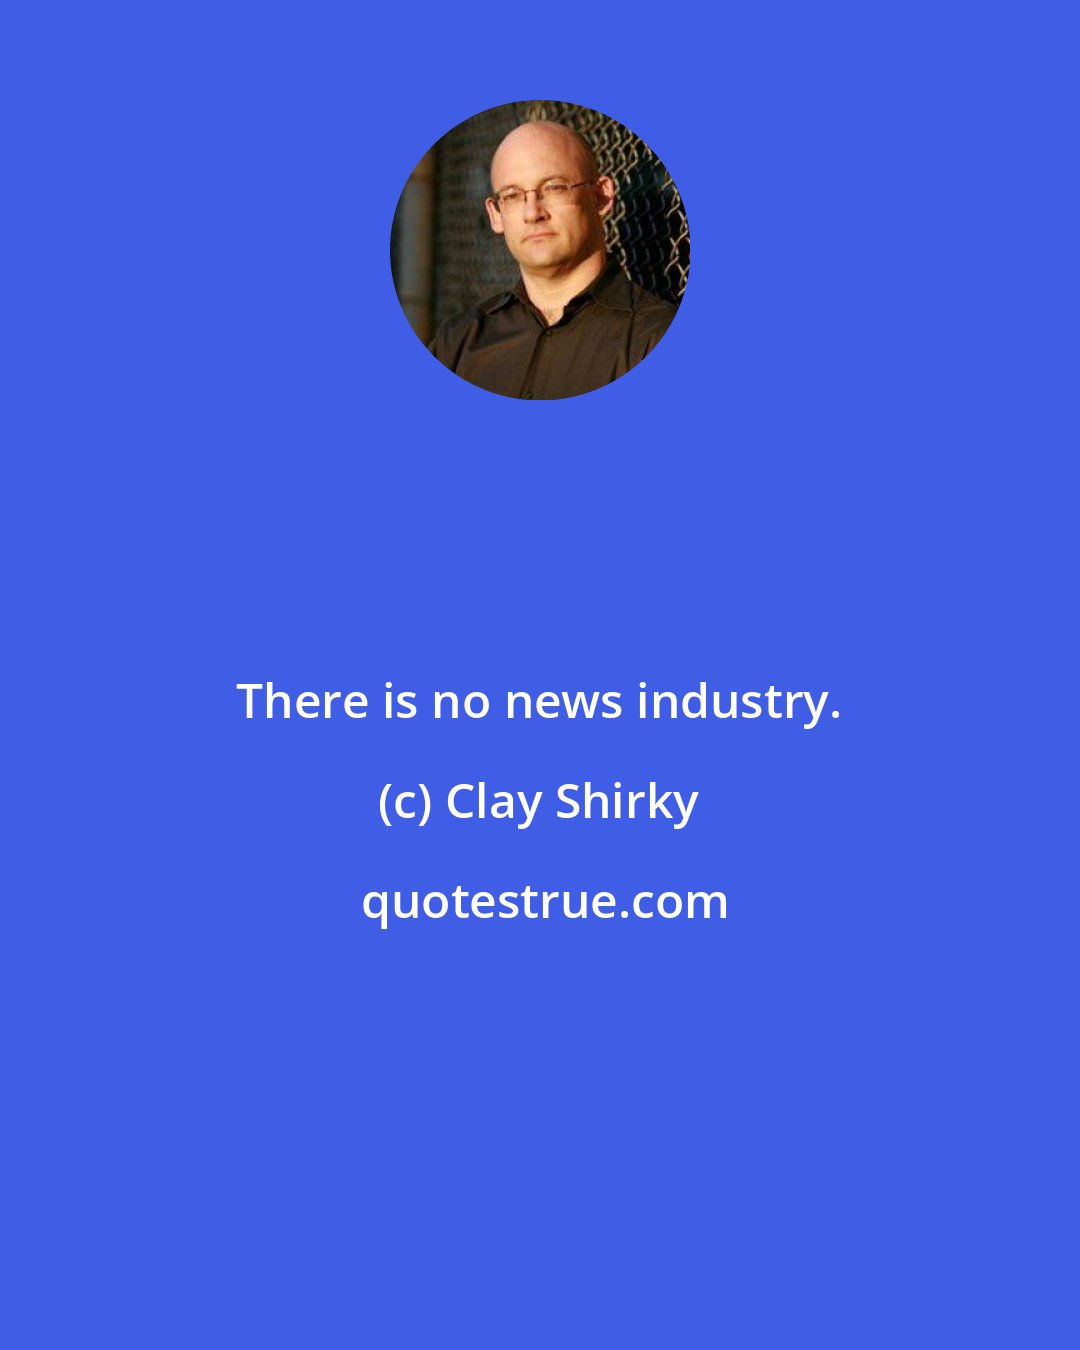 Clay Shirky: There is no news industry.